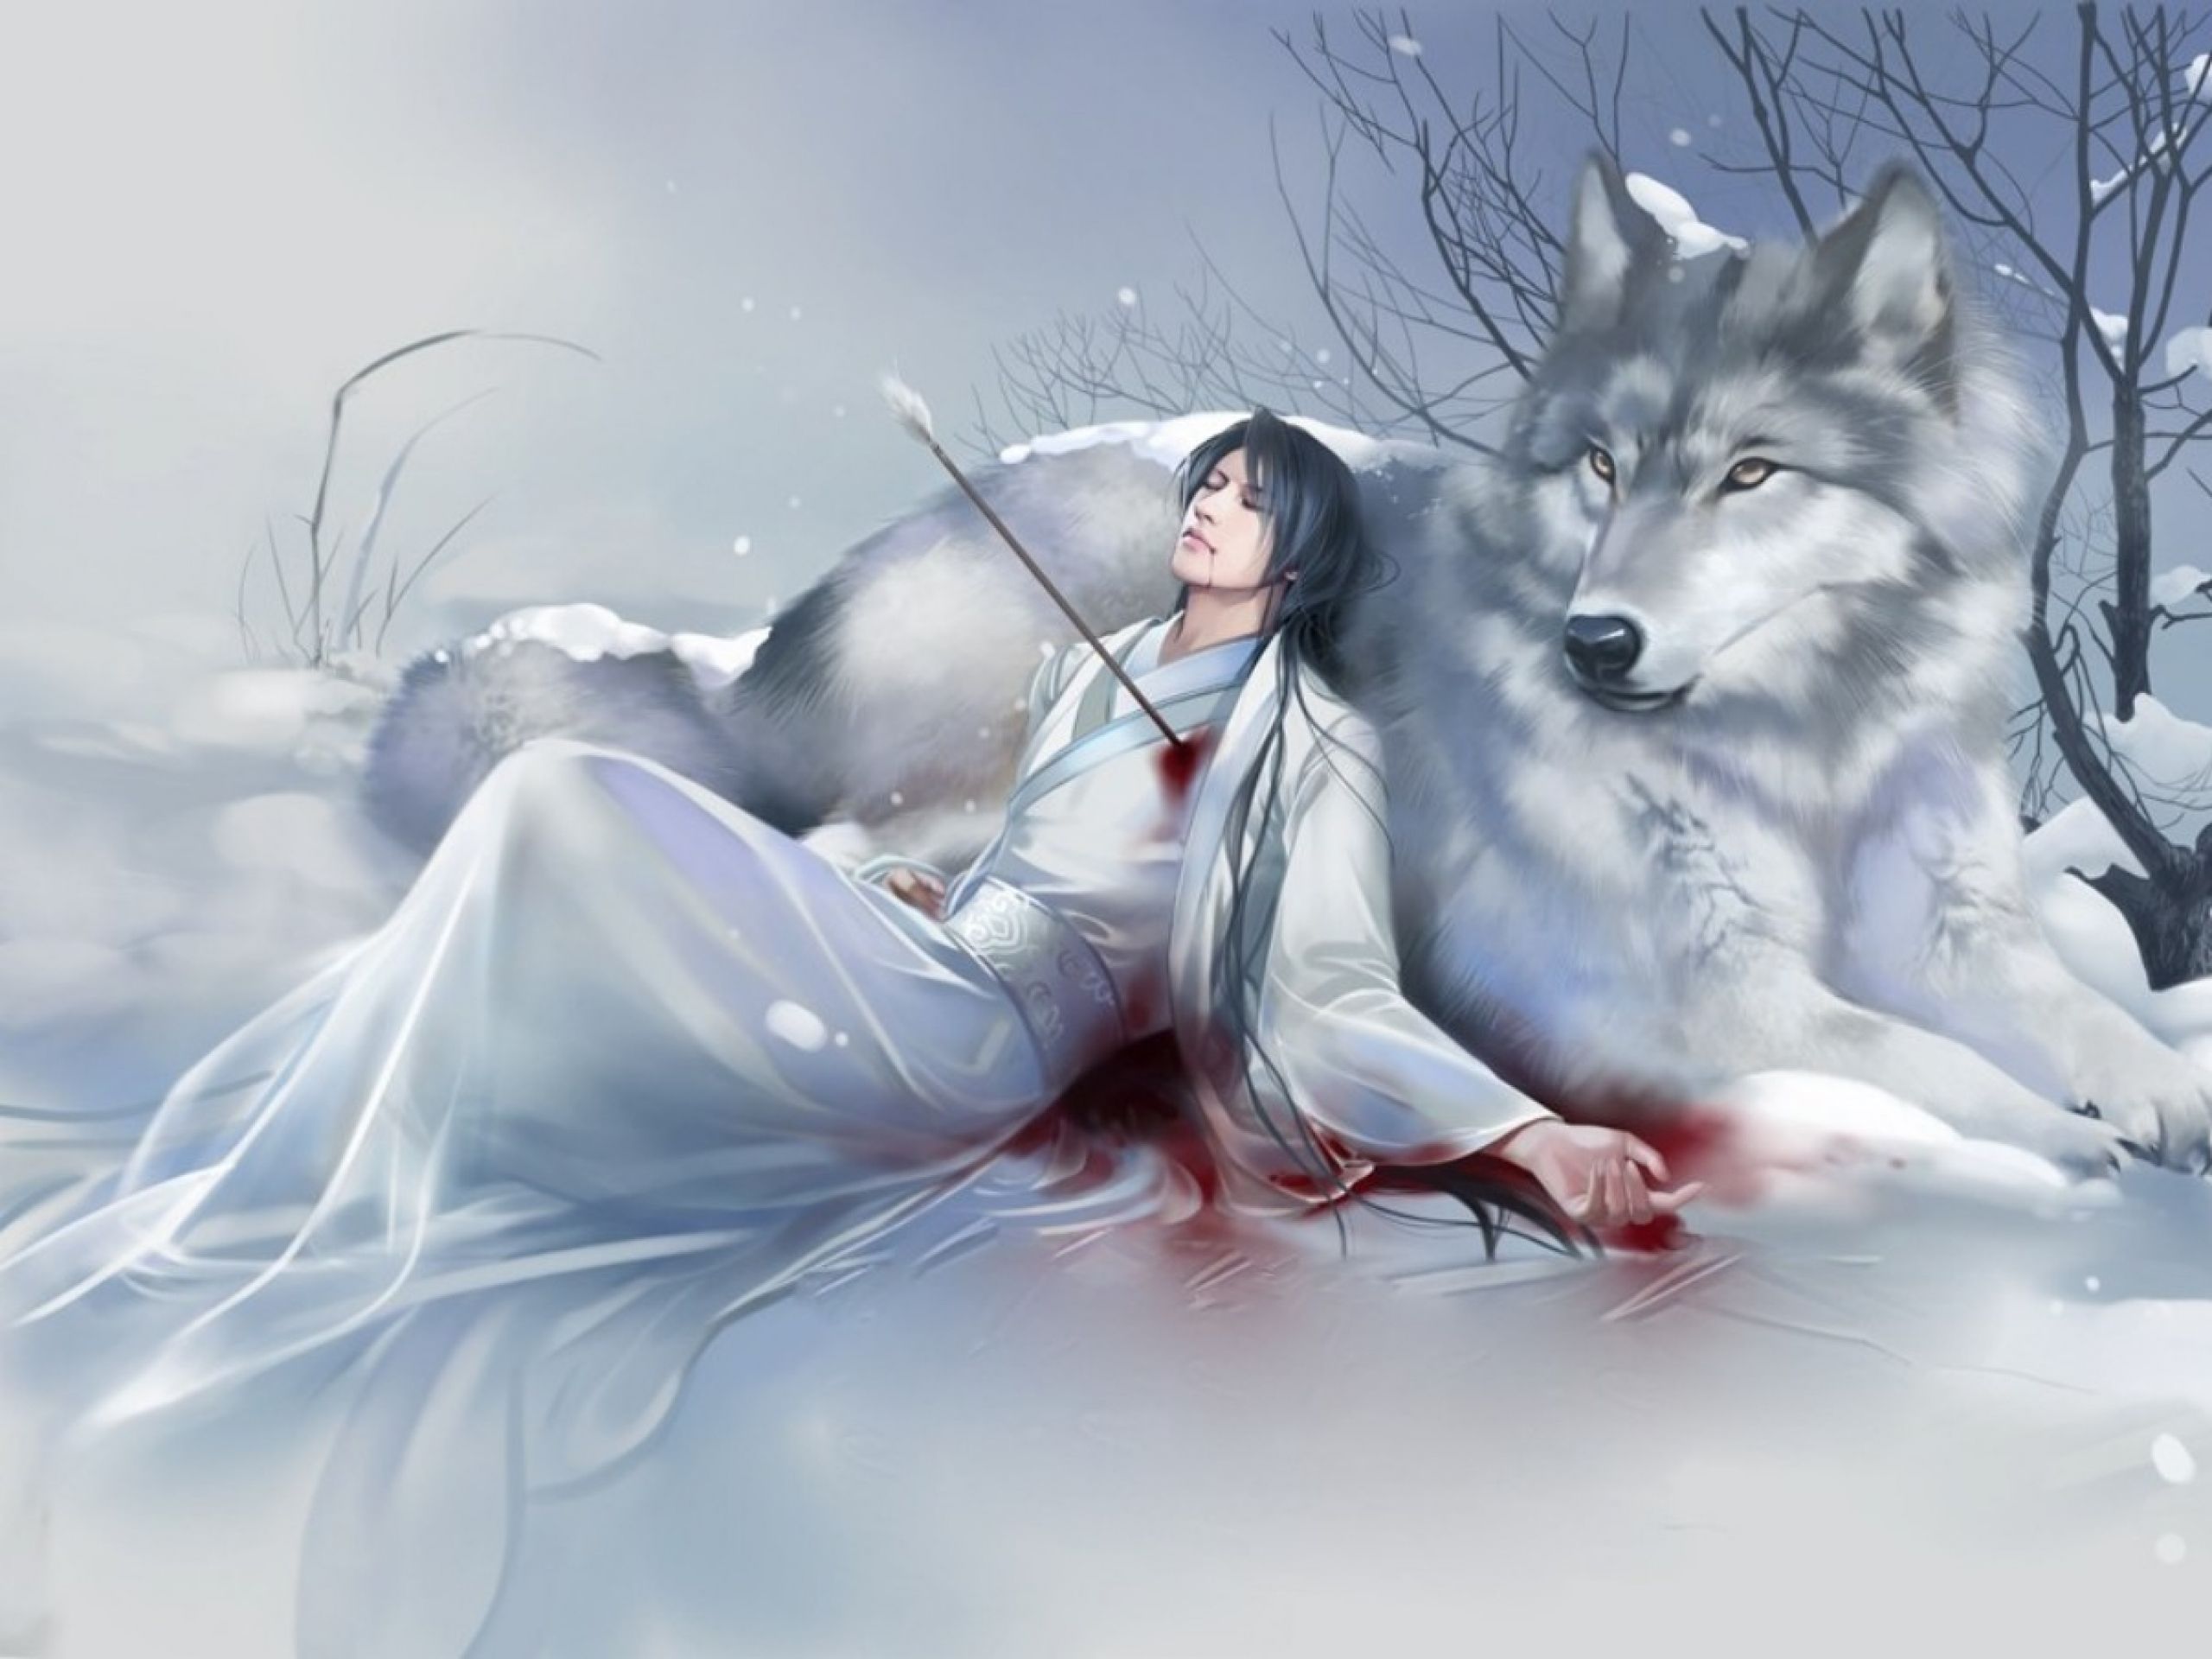 Anime White Wolf Wallpapers